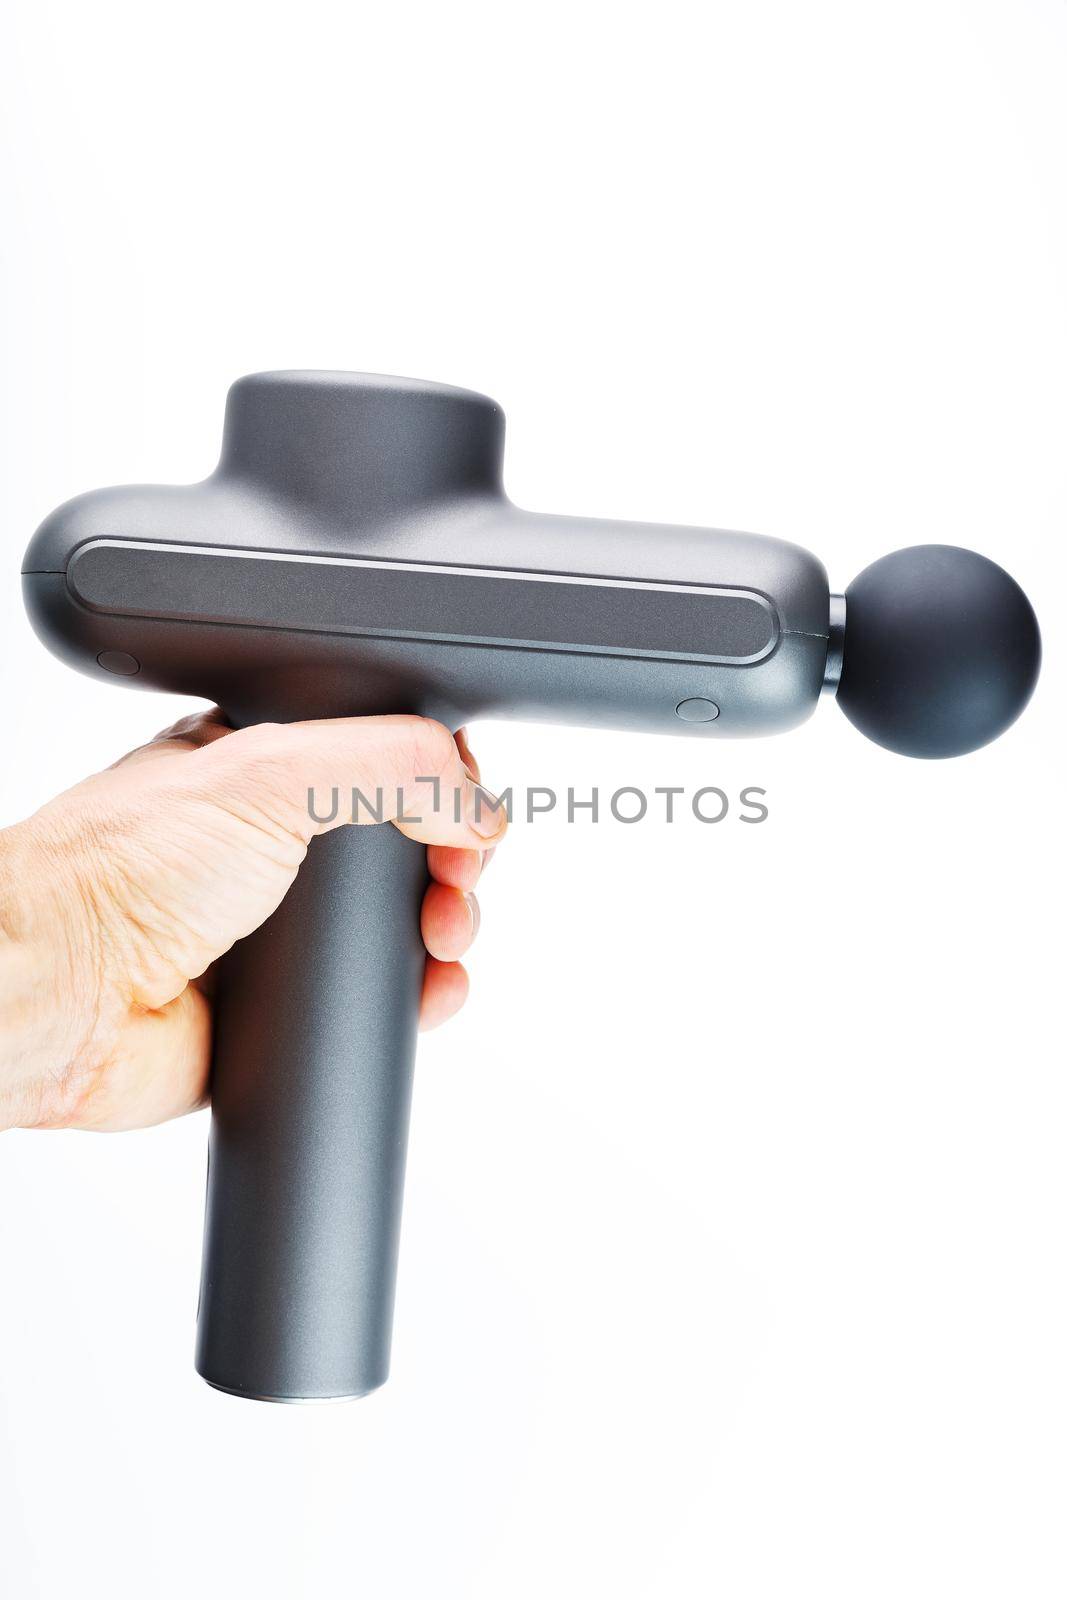 Manual electric body massager in hand on a white background. by AlexGrec